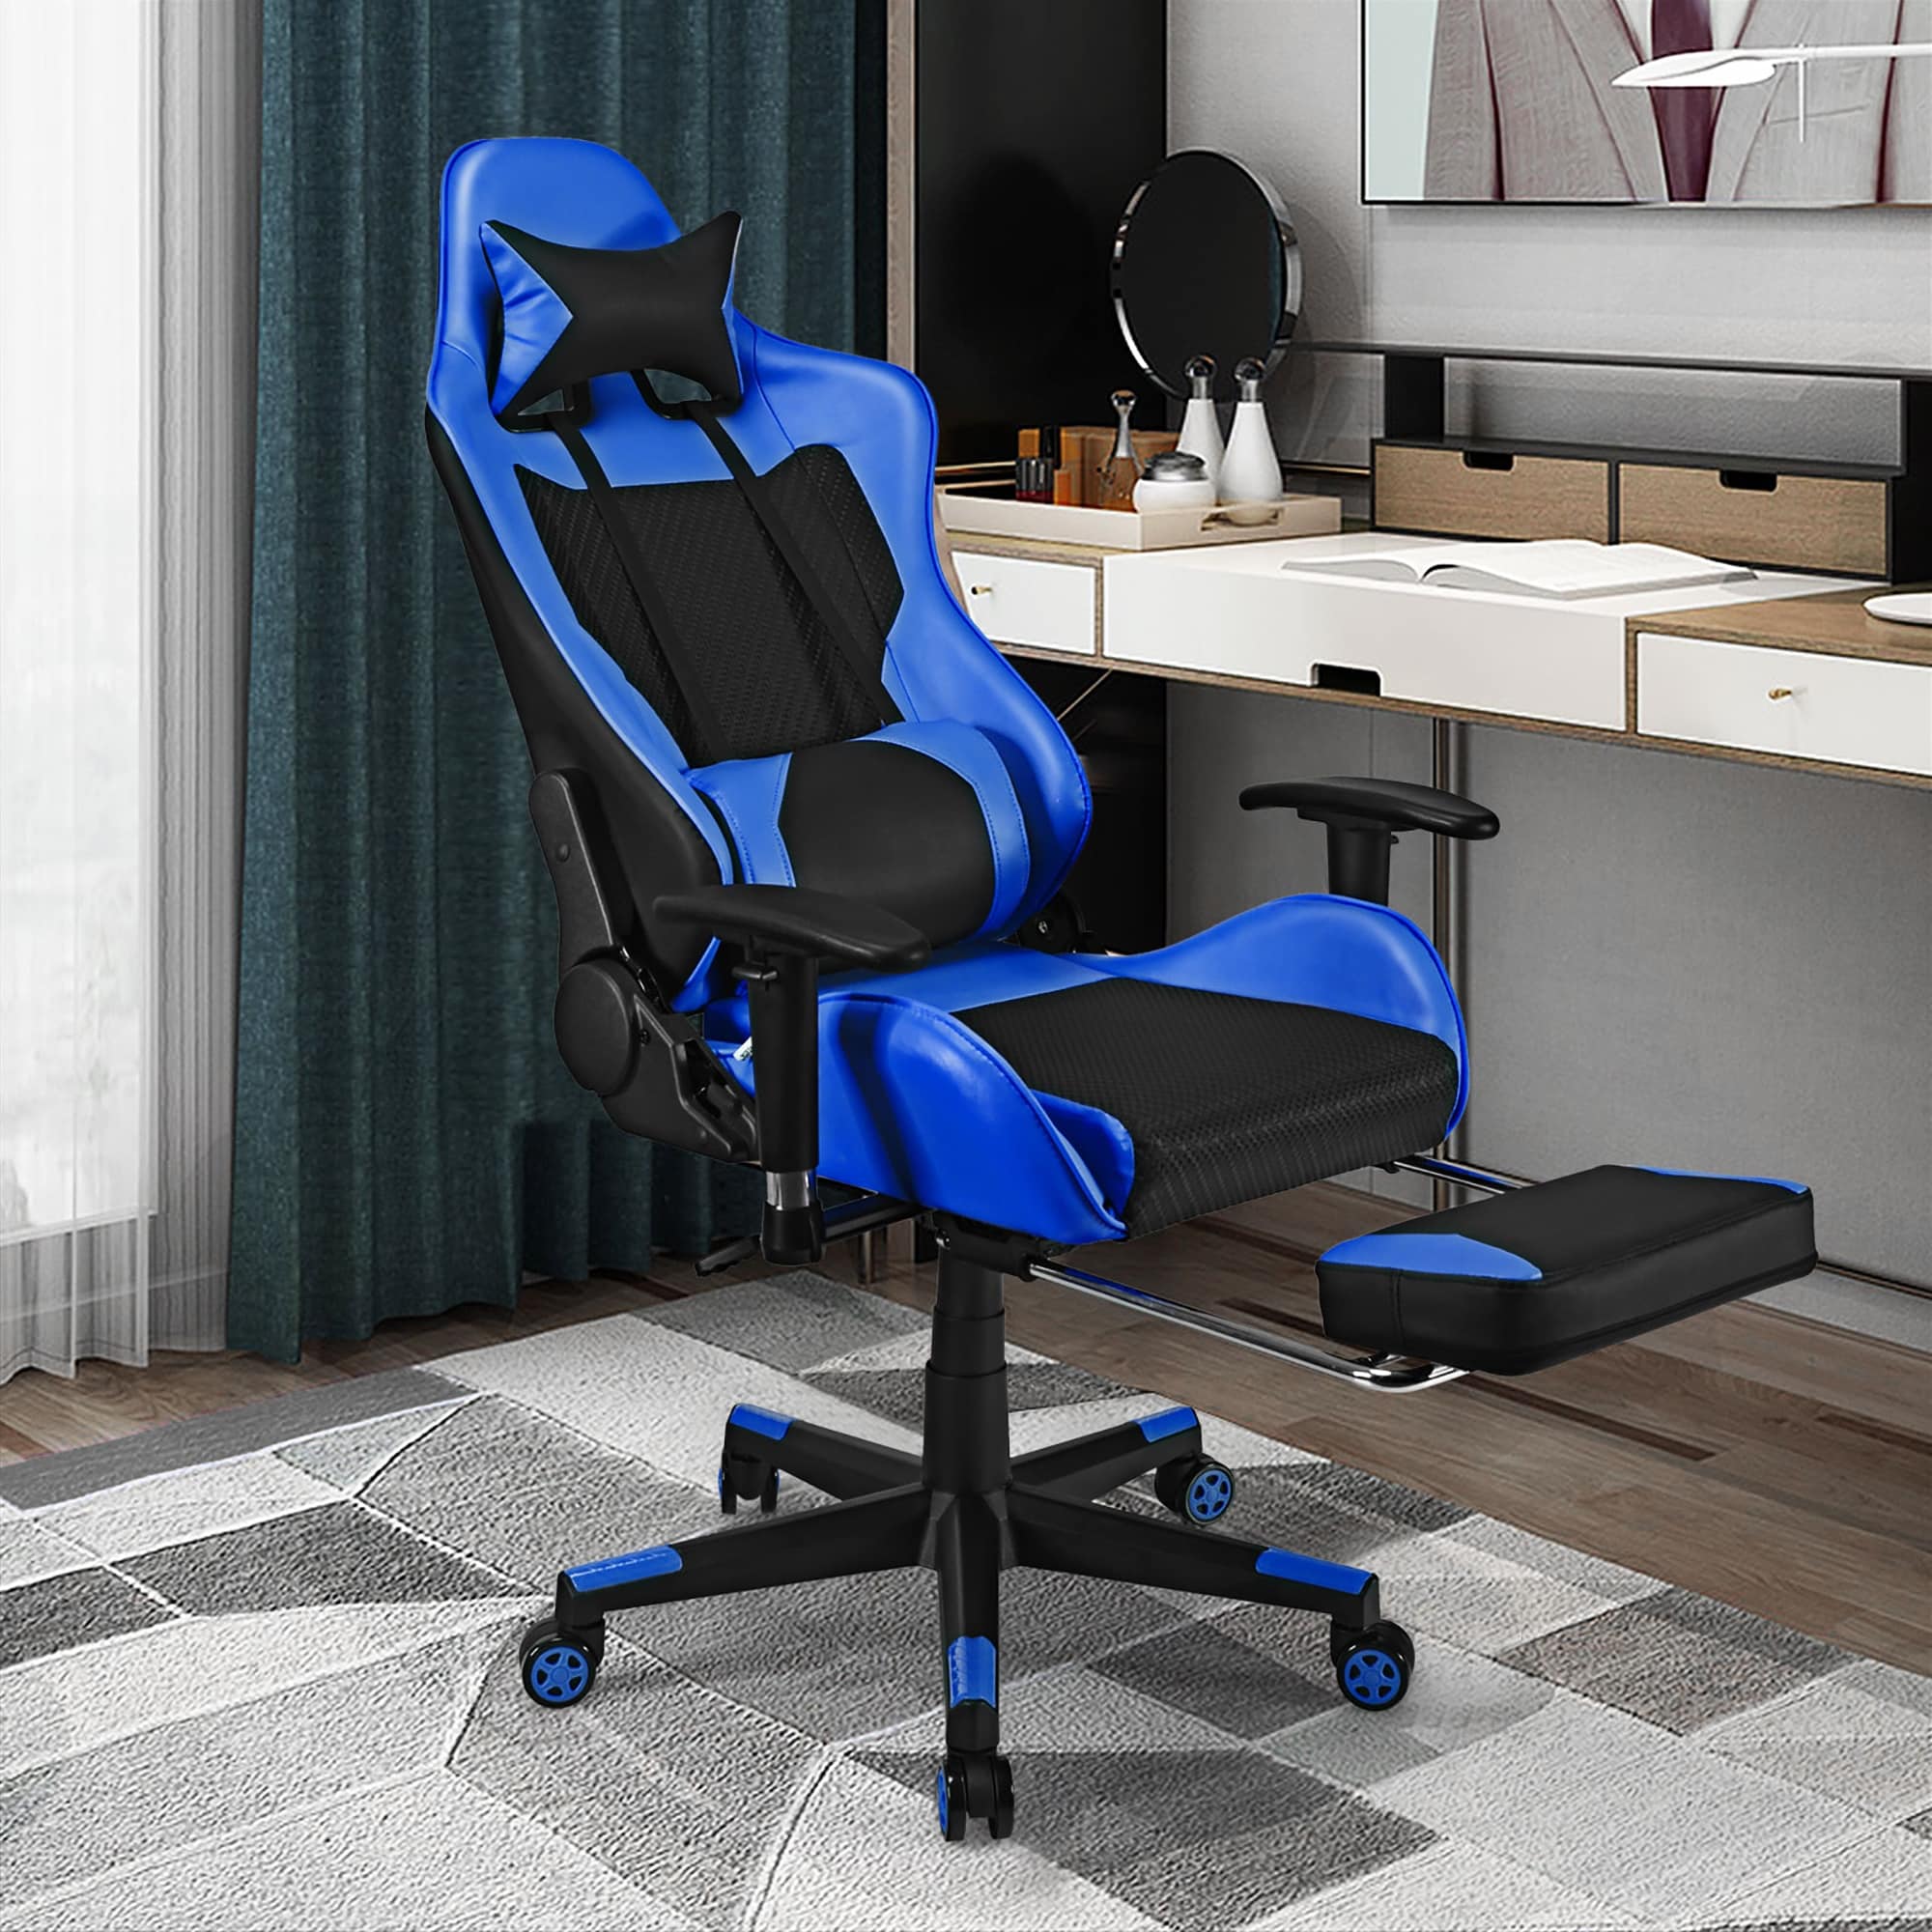 https://ak1.ostkcdn.com/images/products/is/images/direct/1b0650c132aba51af00c708a25b6933008ececee/Gaming-Chair-Massage-Office-Chair-Computer-Gaming-Racing-Chair.jpg